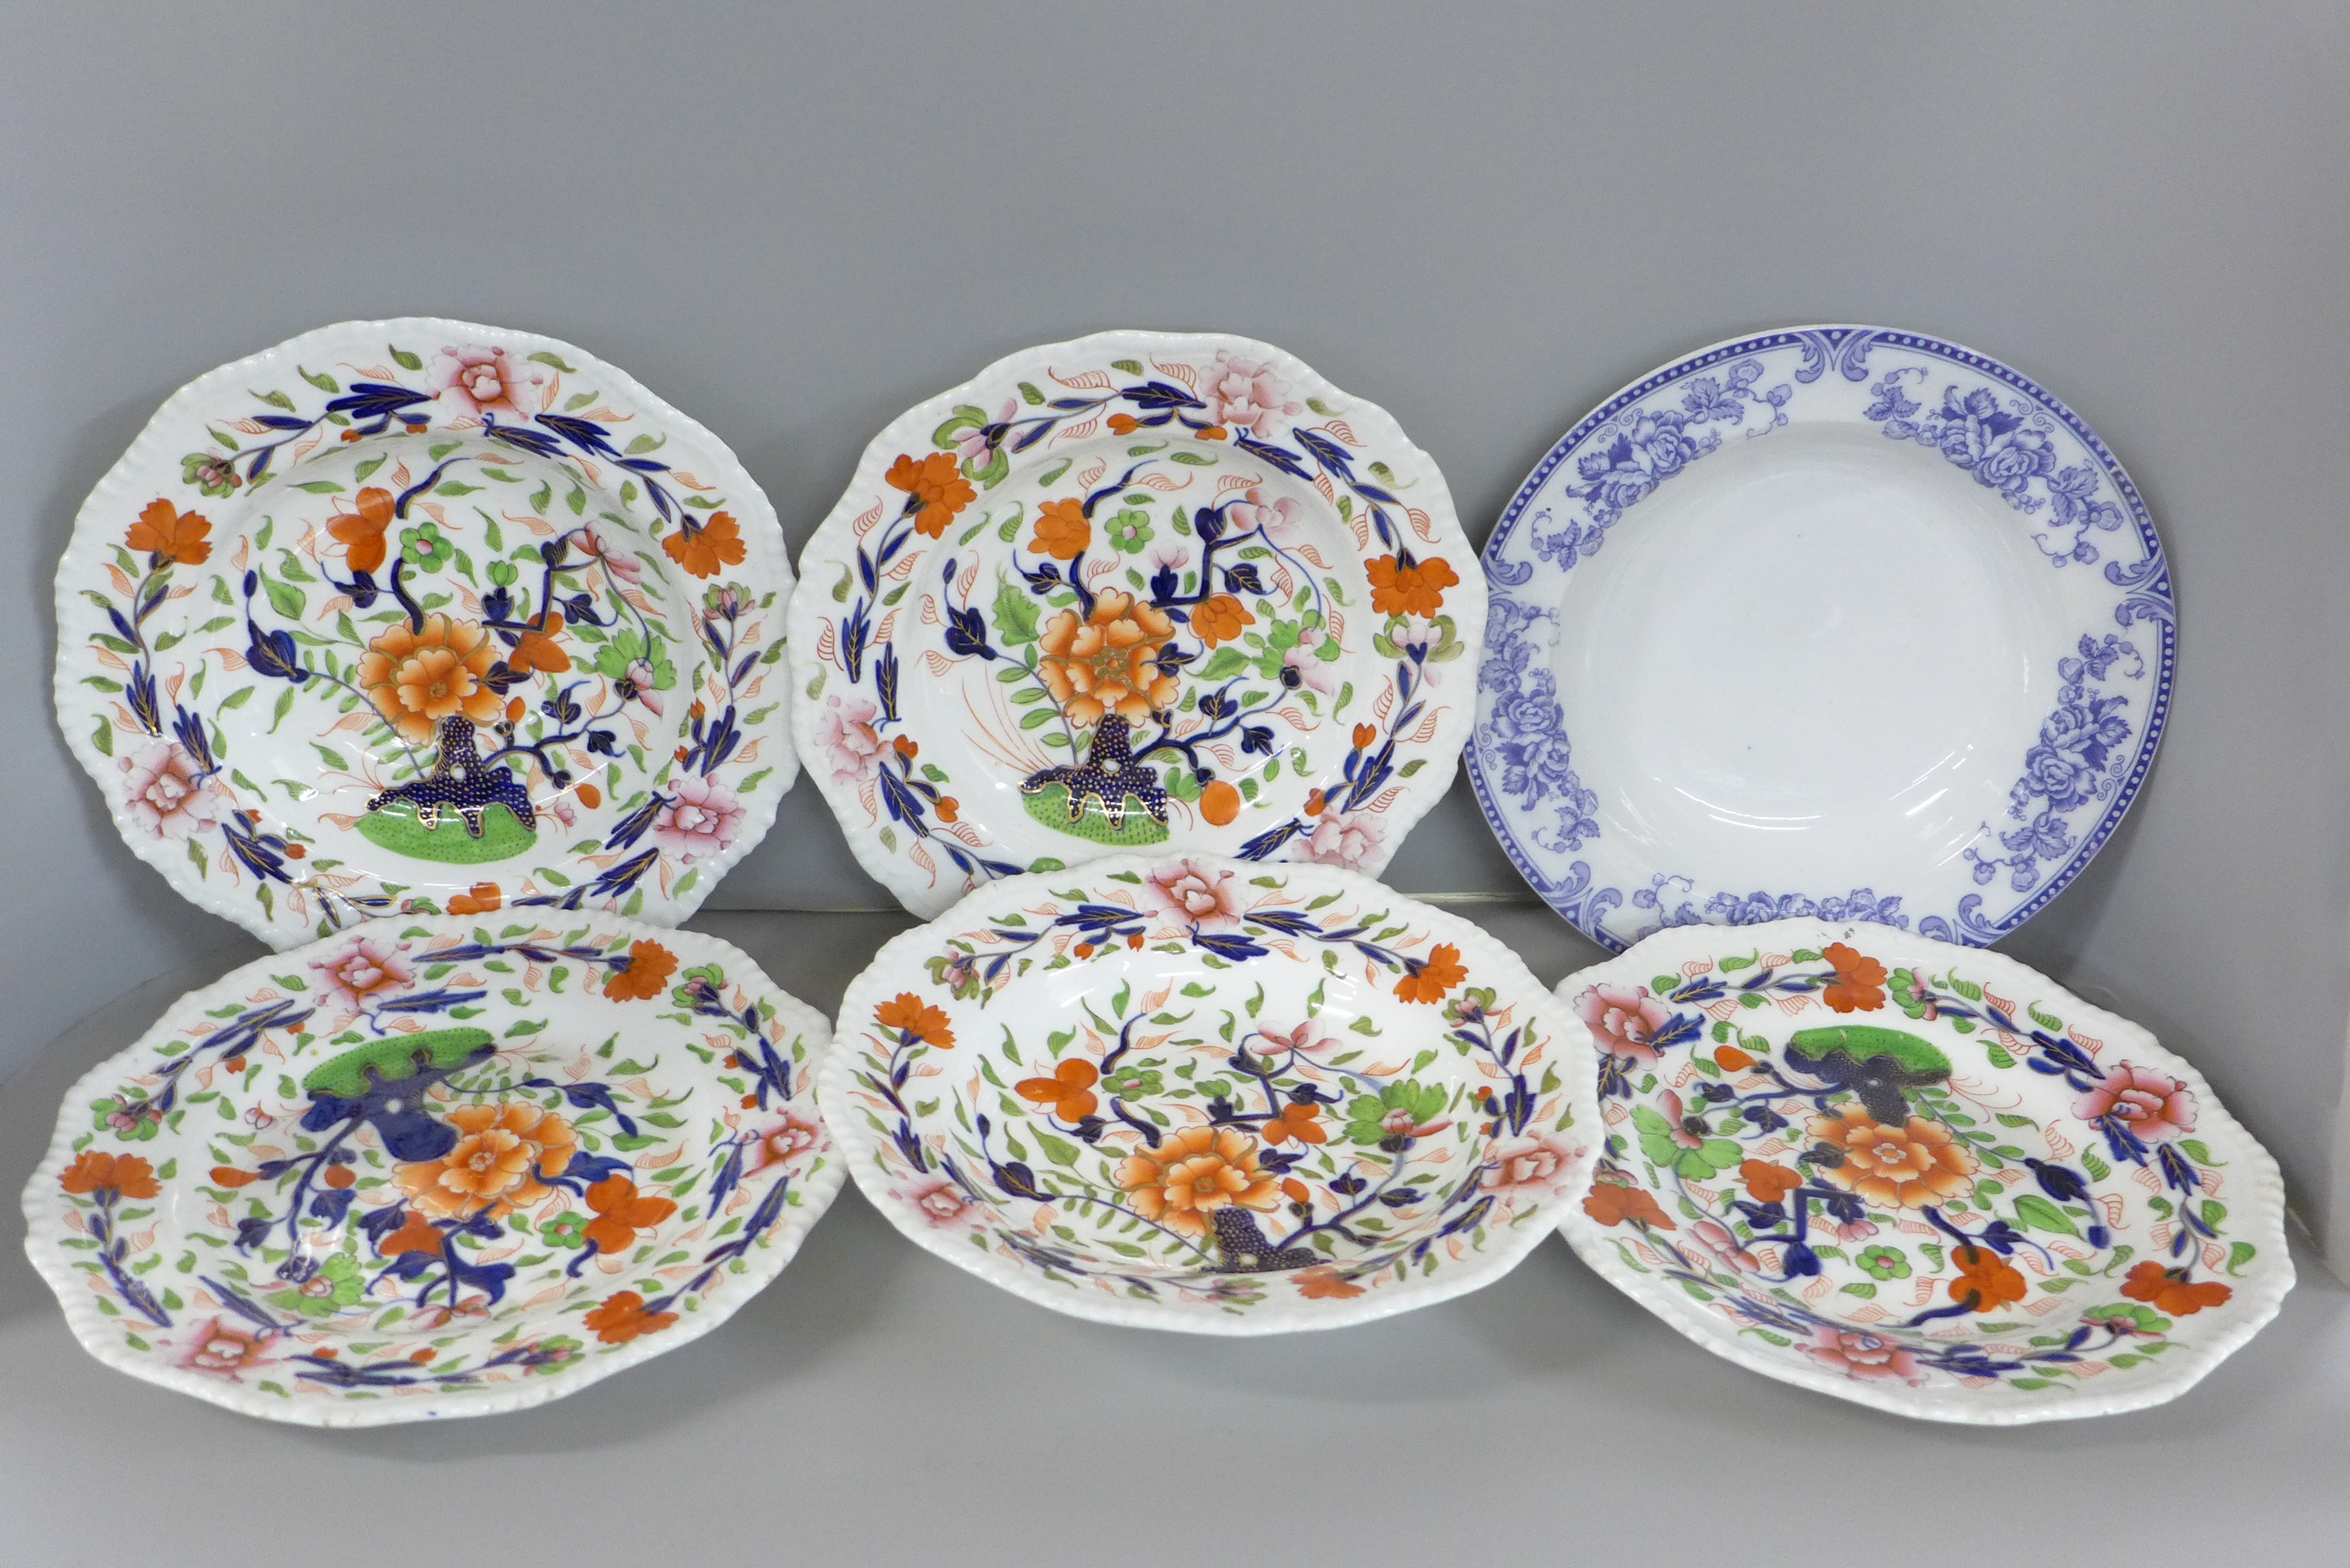 Six early Davenport plates and bowls